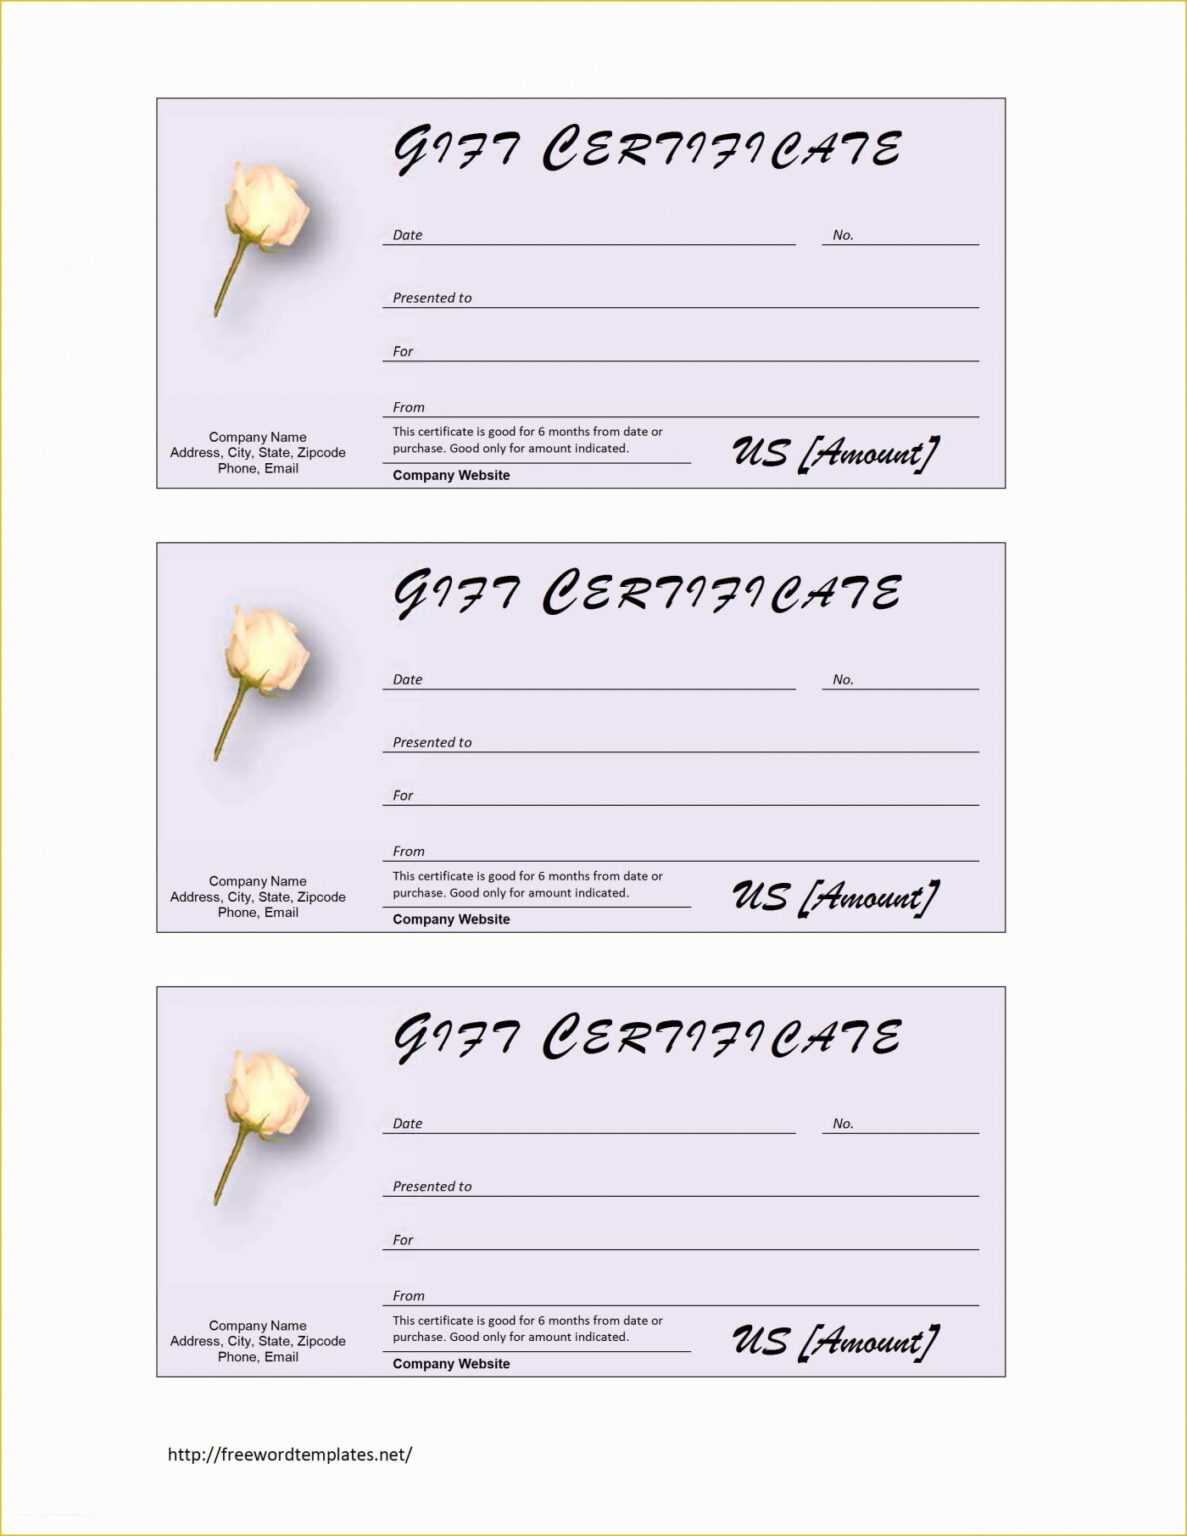 massage-gift-certificate-template-free-printable-great-sample-templates